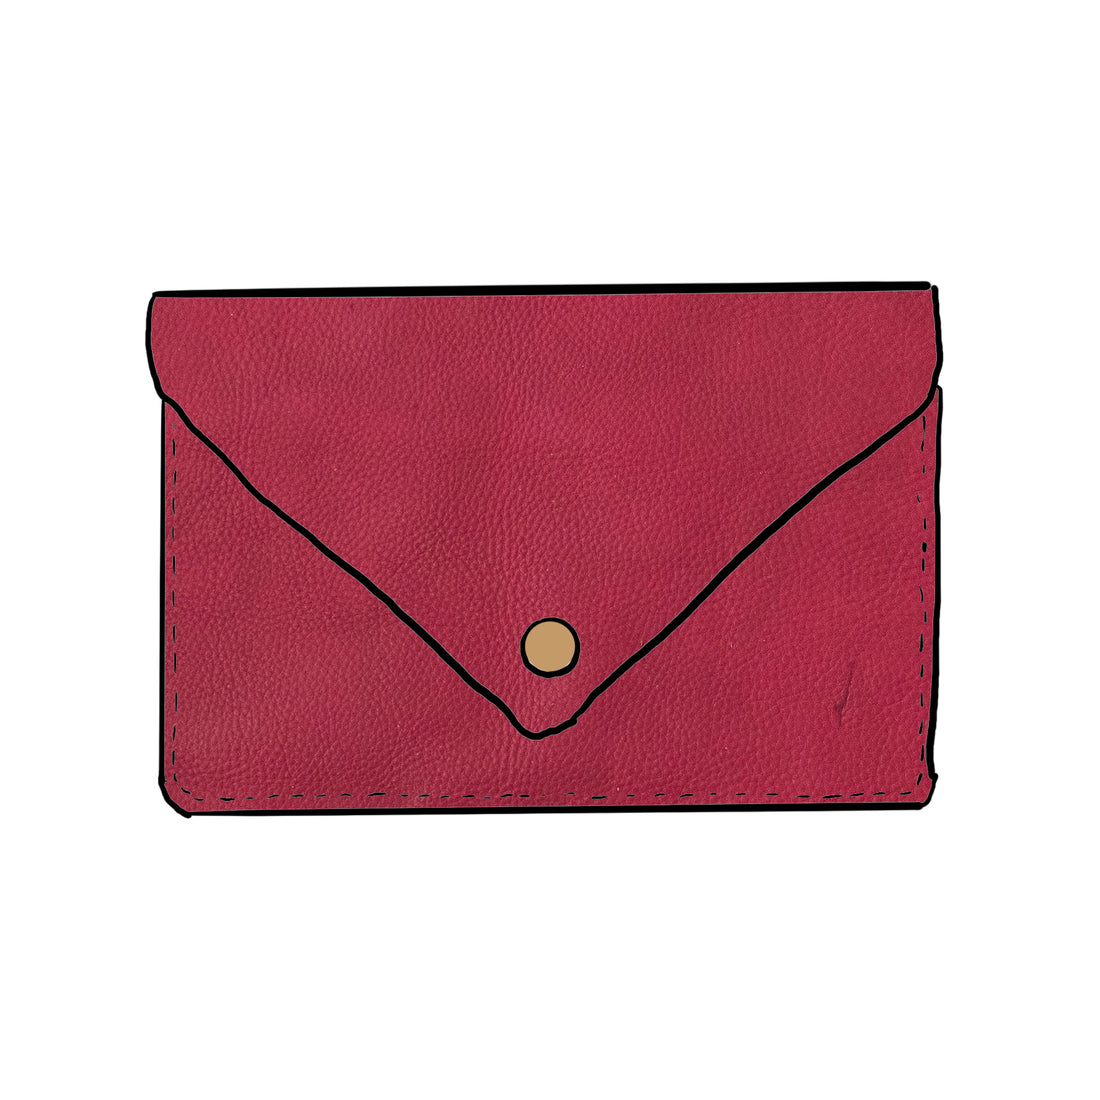 Rose Cypress Leather Clutch